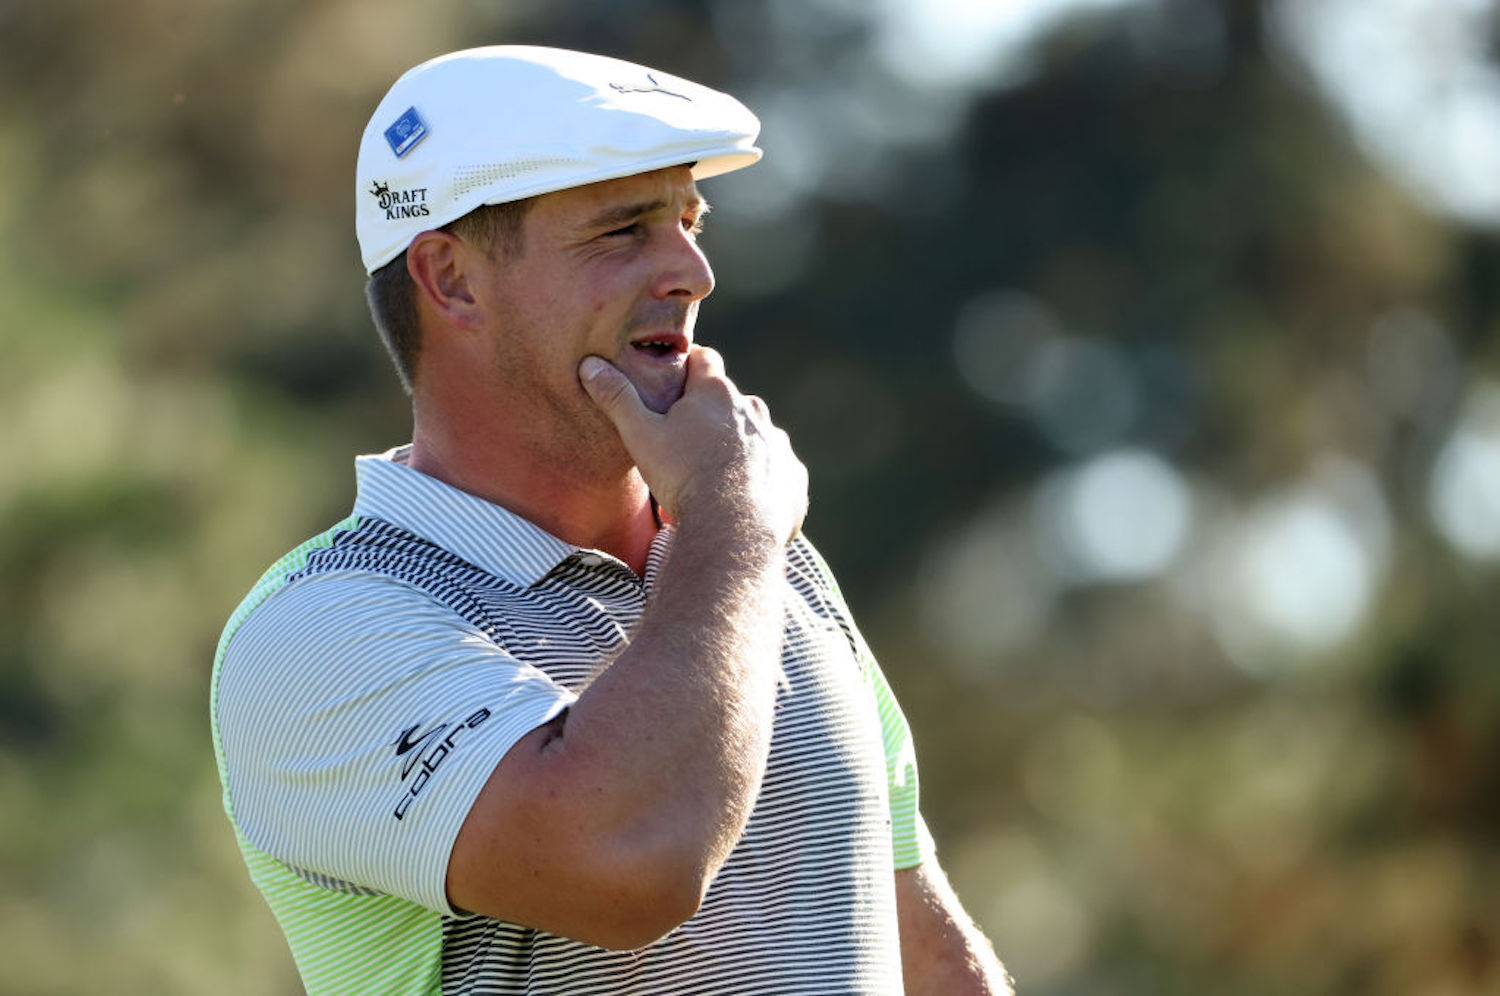 Bryson DeChambeau is the longest hitter on the PGA Tour right now, but he was in awe watching a long-drive champion hit a 300-yard 8-iron.